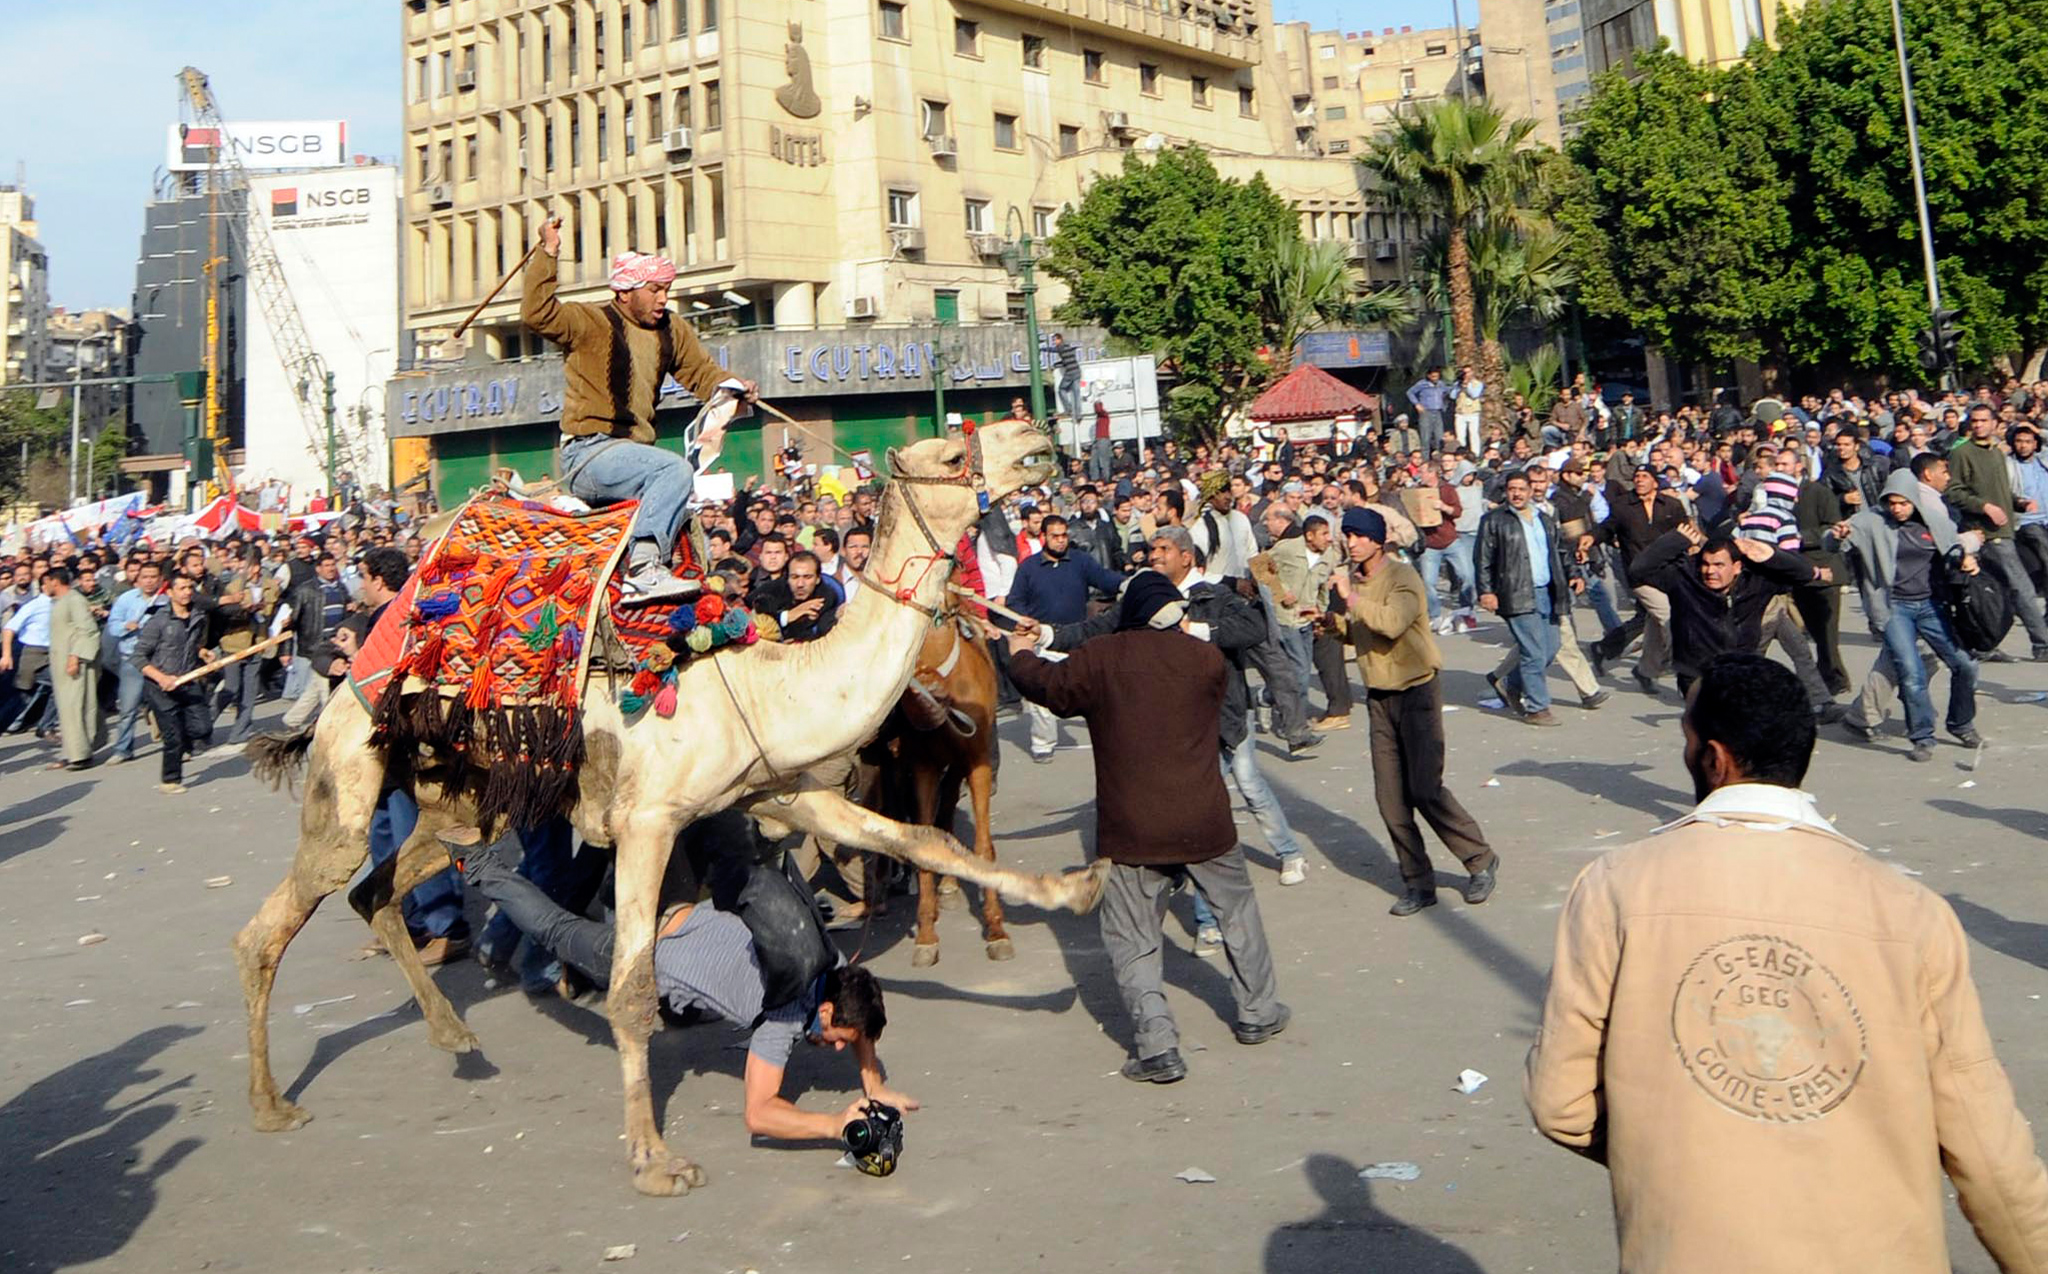 The two sides faced off late in the evening. Rocks, sticks, Molotov cocktails, and even camels <br>
were used by Mubarak's supporters in an attempt to drive protesters away out of Tahrir Square.
(Photo credit: Mehdi Chebil)
